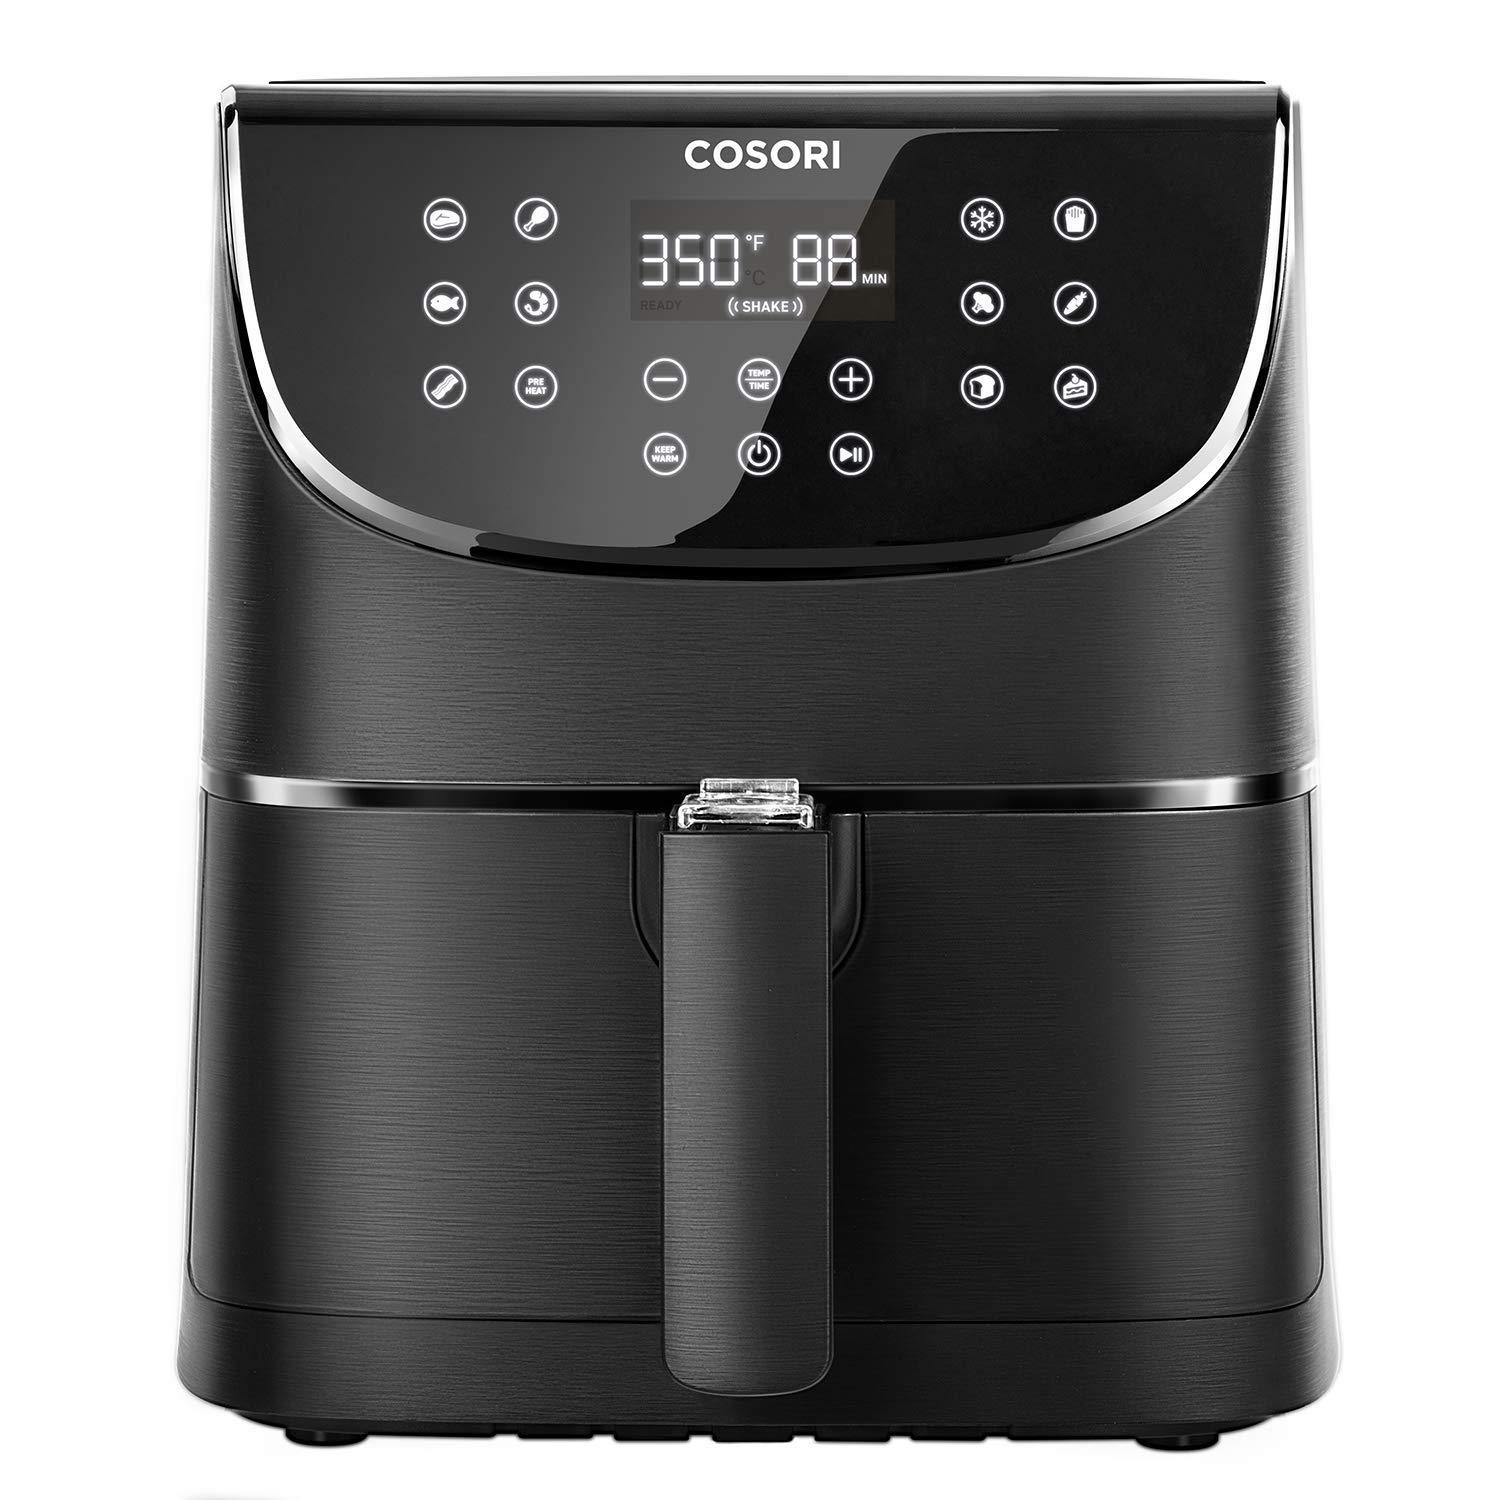 COSORI Air Fryer(100 Recipes),5.8Qt Electric Hot Air Fryers XL Oven Oilless Cooker,11 Cooking Preset, Preheat&Shake Remind, LED Digital Touchscreen,Nonstick Basket,2-Year Warranty,ETL/UL Listed,1700W